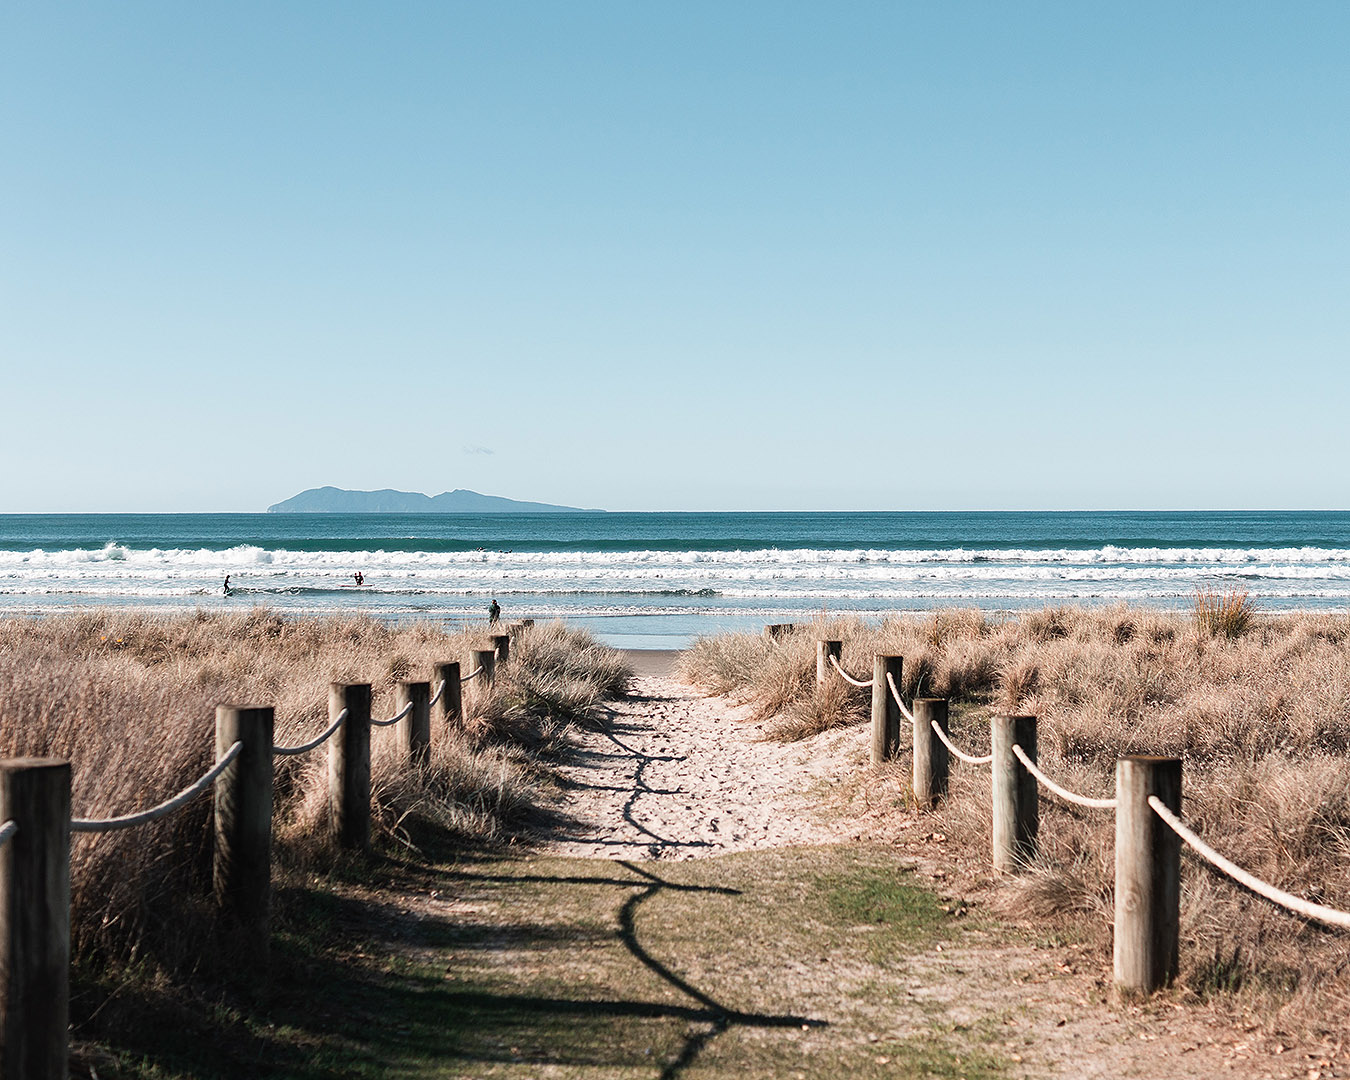 A wide path leads down to the beach at Waihi.